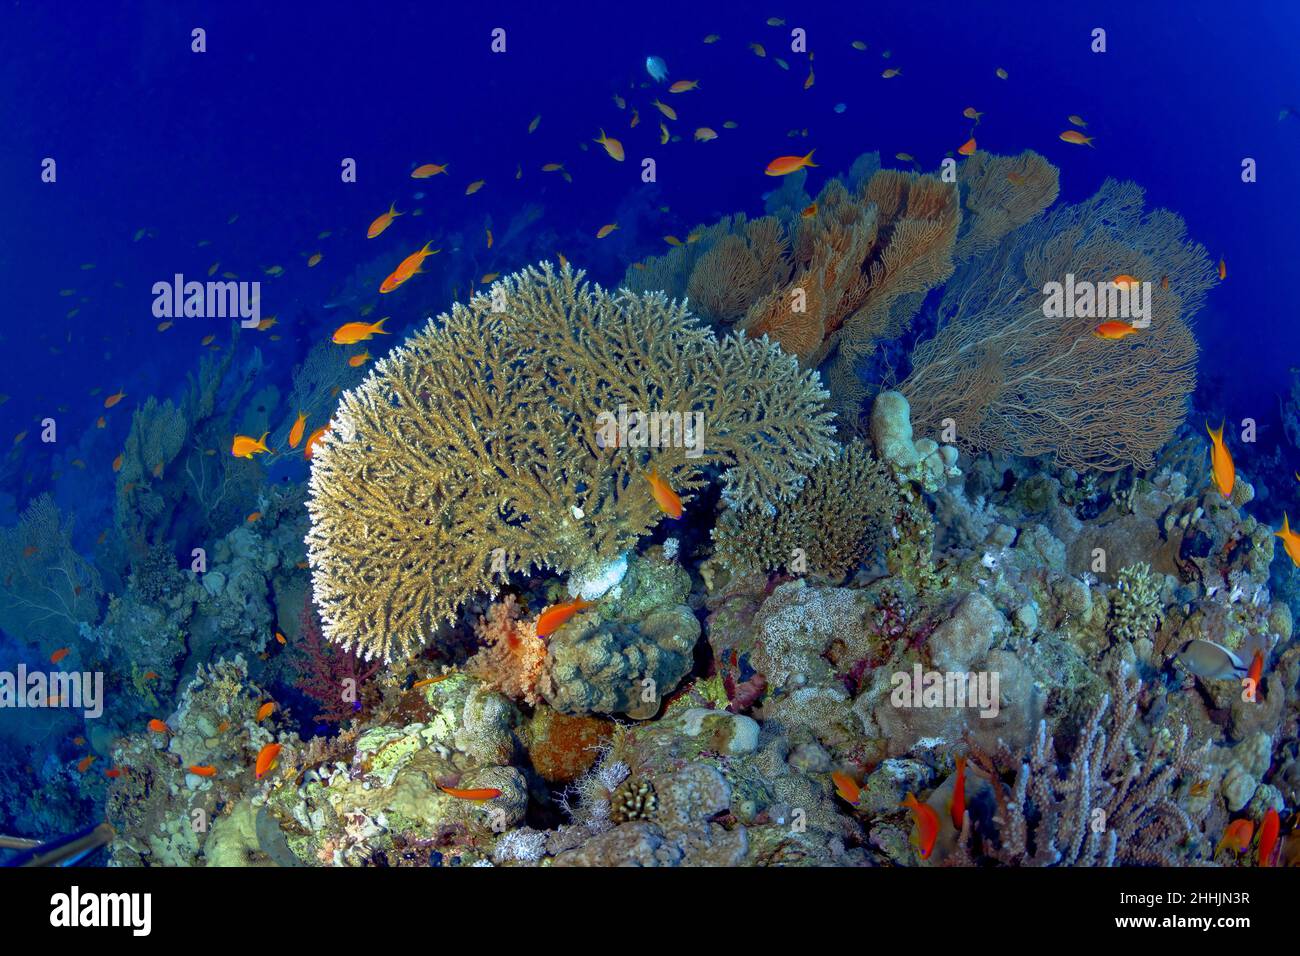 Tiny bright reef fish swimming around Alcyonacea gorgonian coral reefs in clean blue seawater of Red Sea Stock Photo